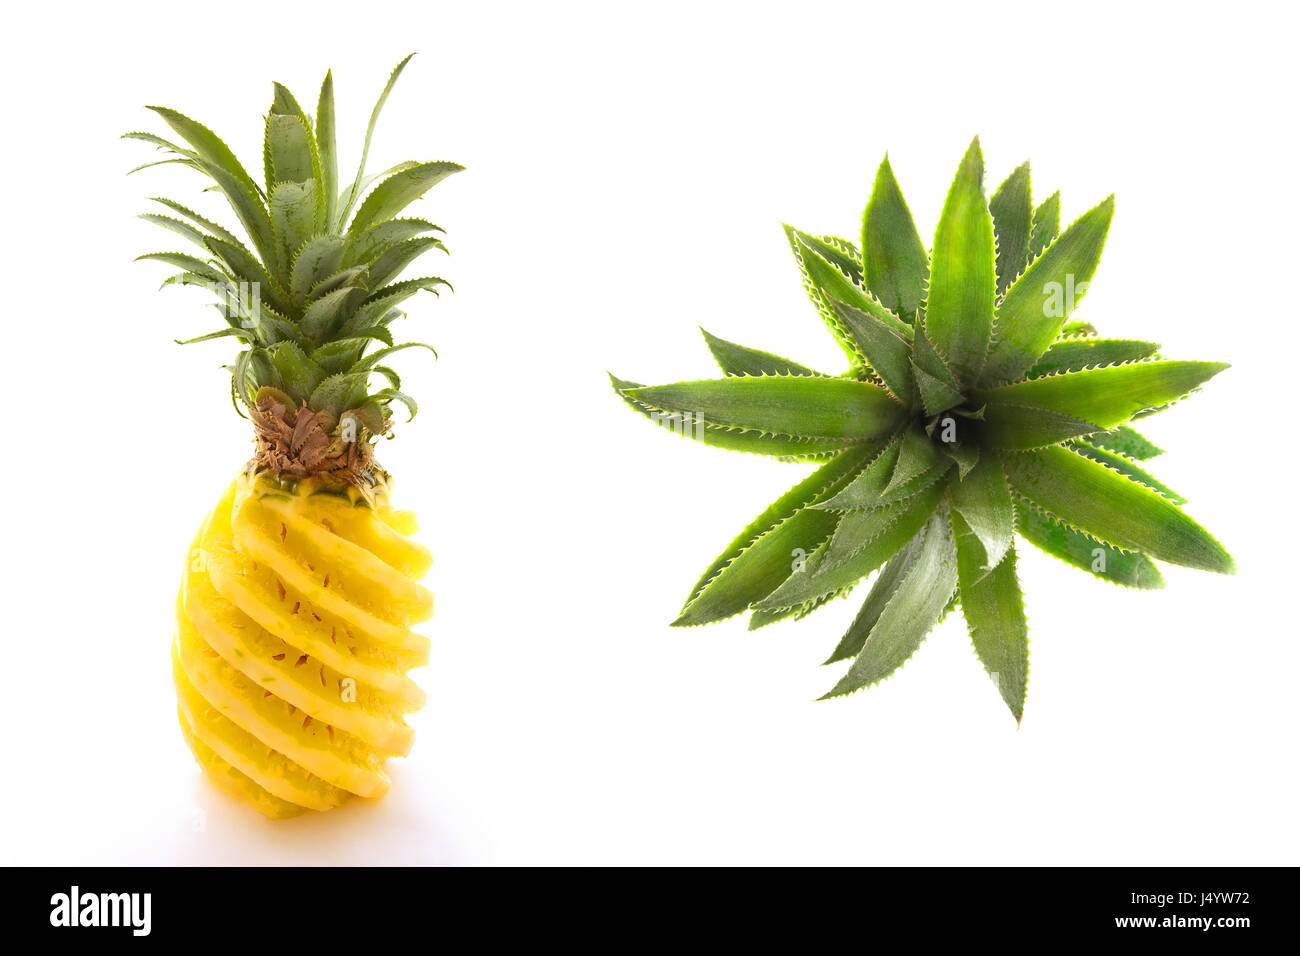 Collage of a peeled pineapple and its stalk view from above isolated on white background Stock Photo